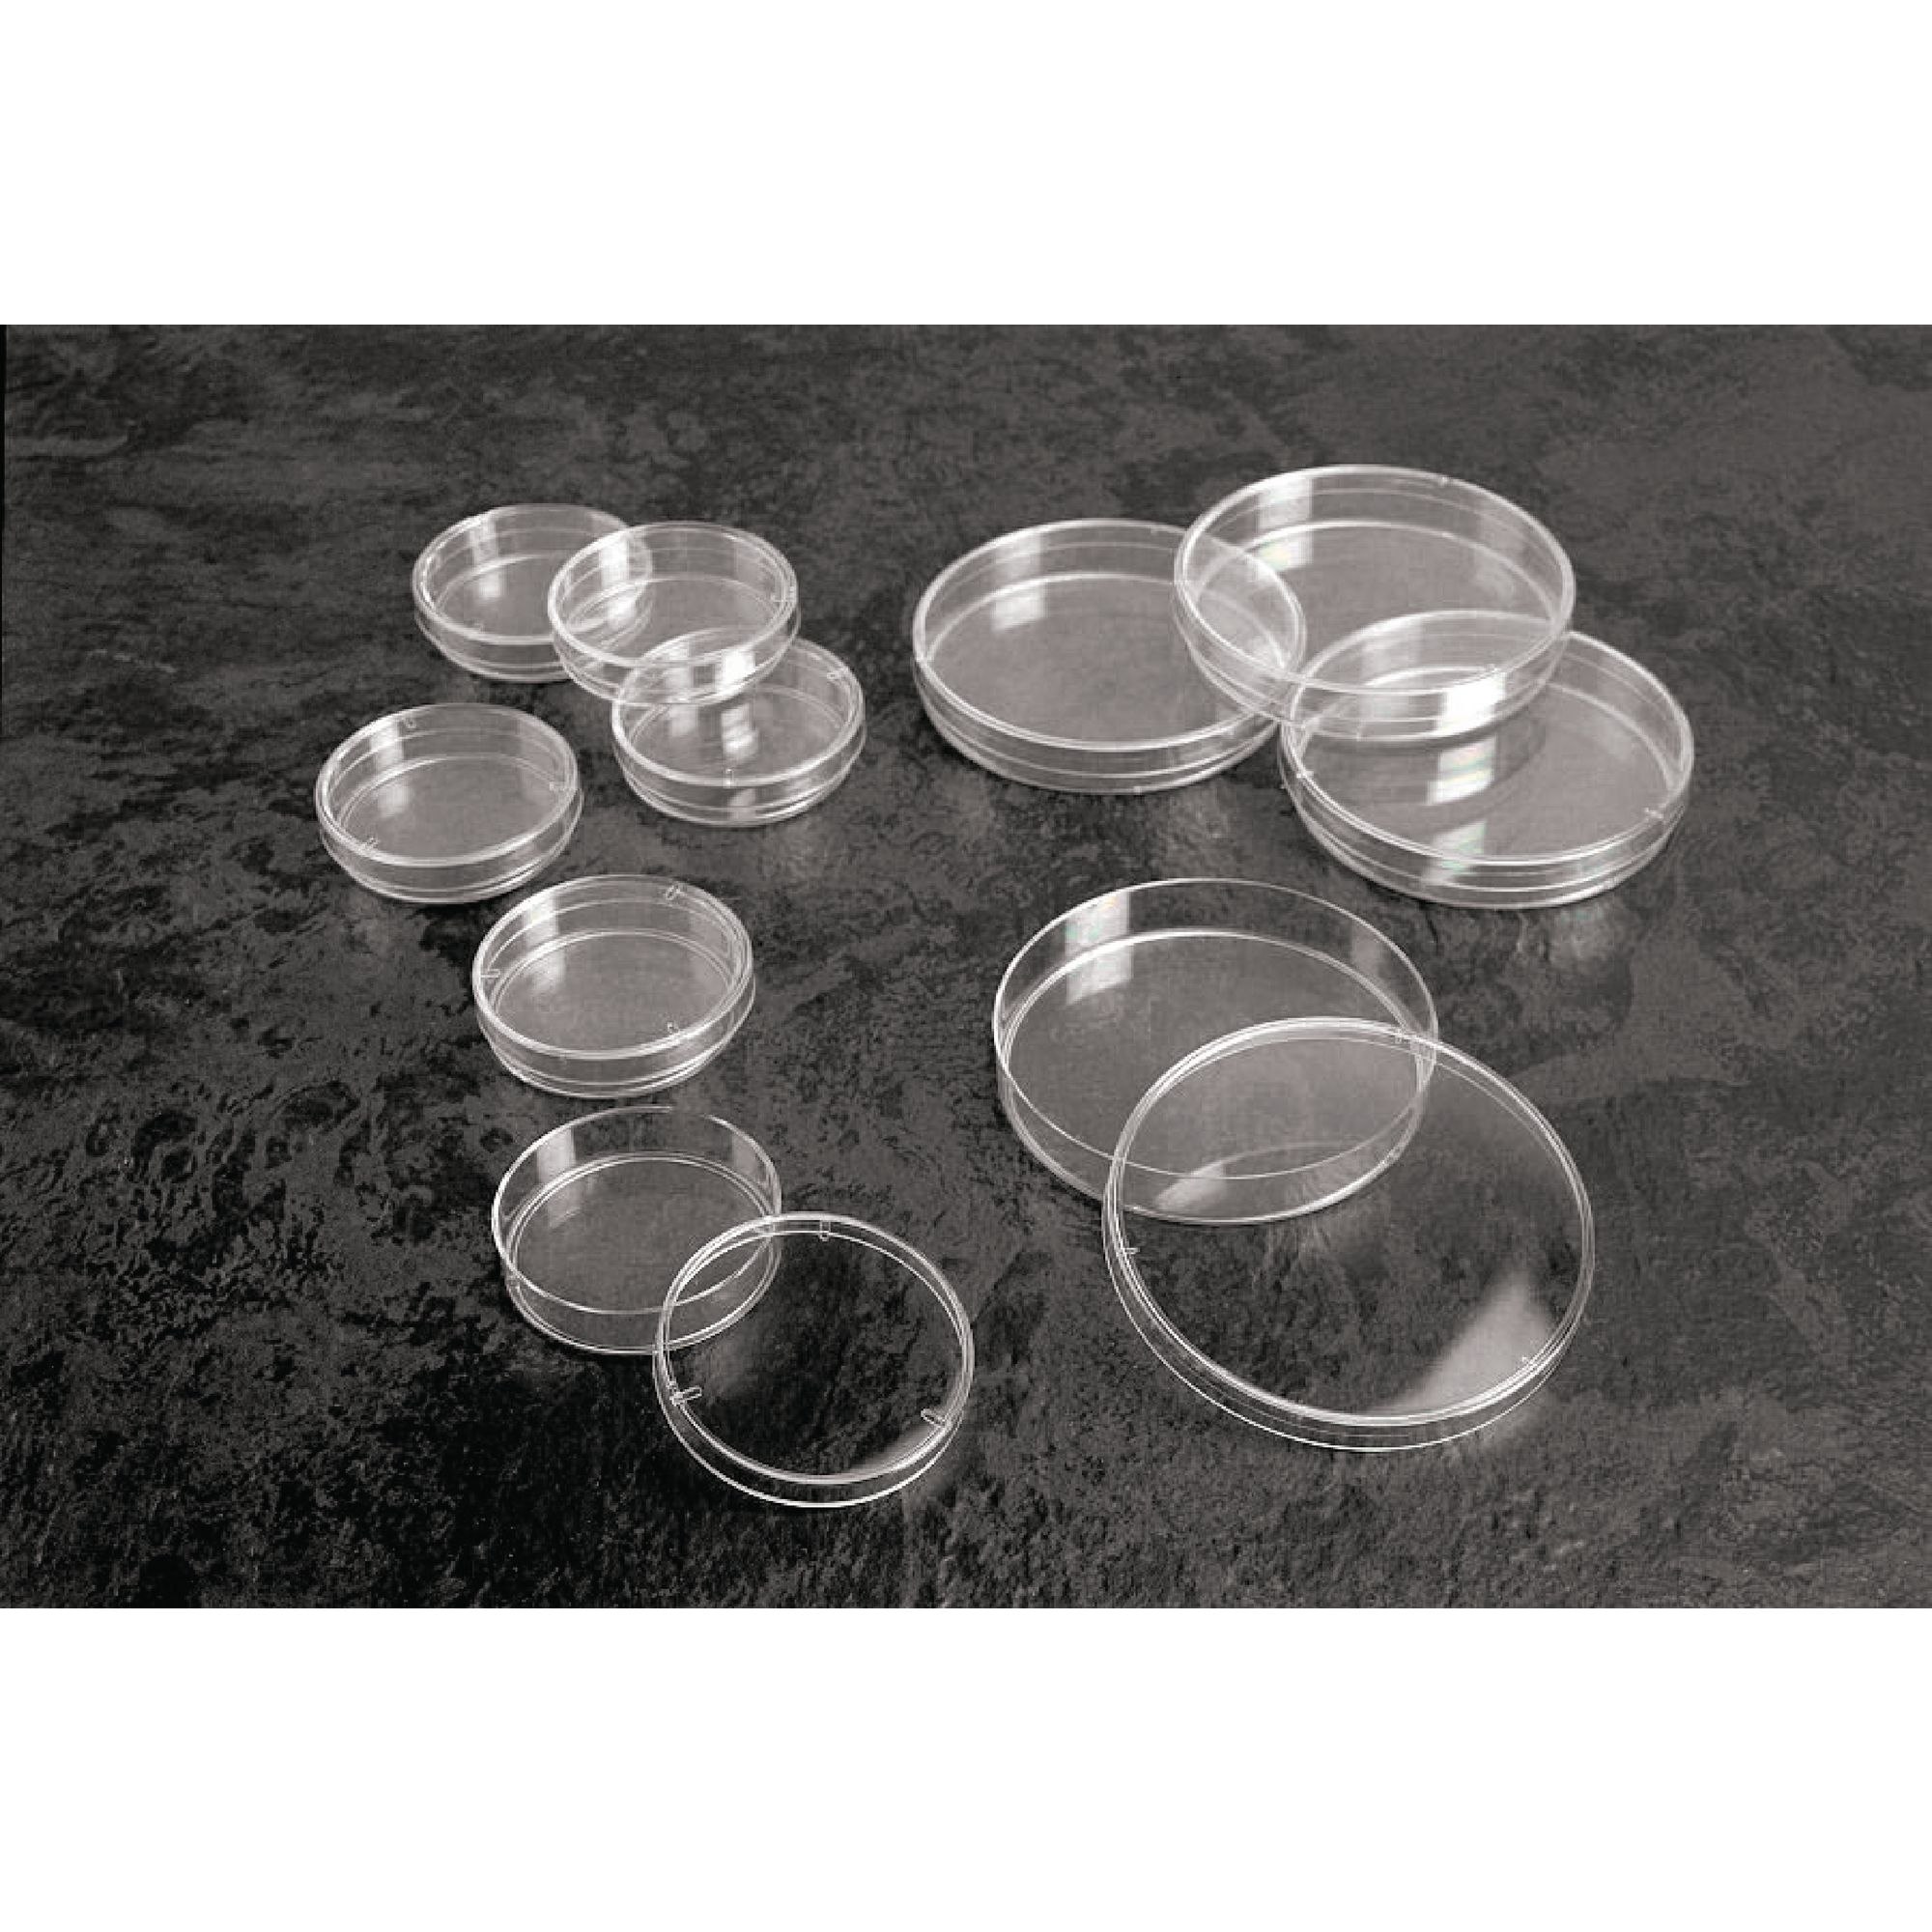 Petri Dishes, Disposable - 90 x 15mm